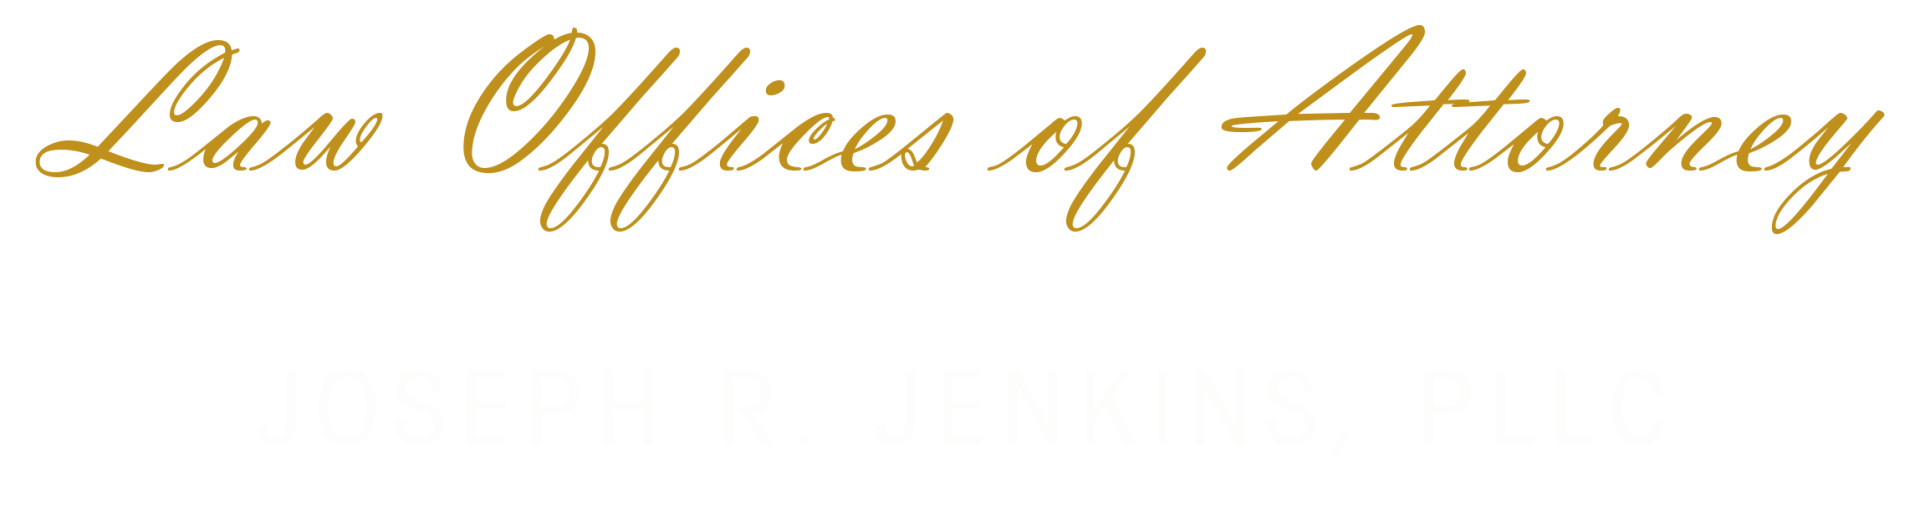 Law Offices of Attorney Joseph R. Jenkins, PLLC